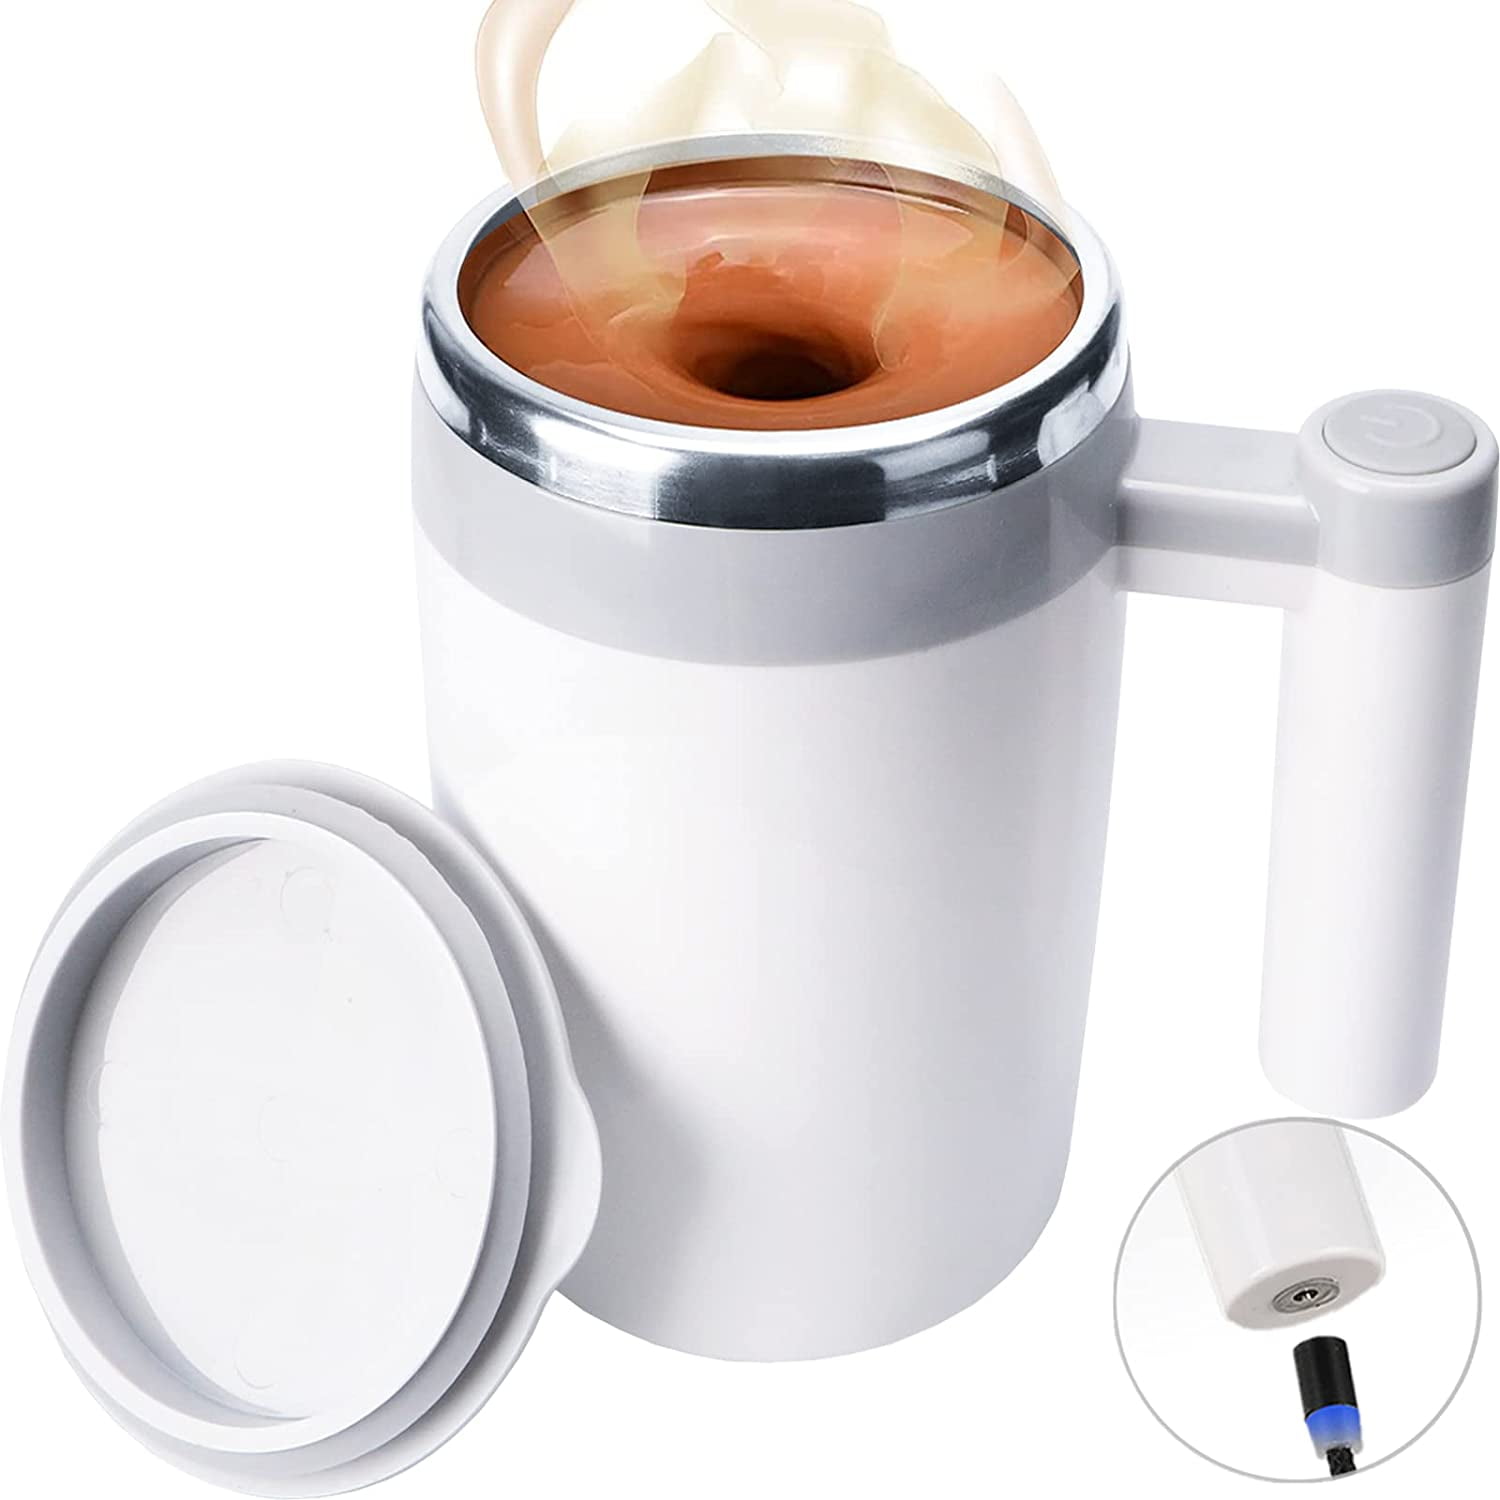 FCSWEET Self Stirring Mug,Rechargeable Auto Magnetic Coffee Mug with 2Pc  Stir Bar,Waterproof Automatic Mixing Cup for Milk/Cocoa at